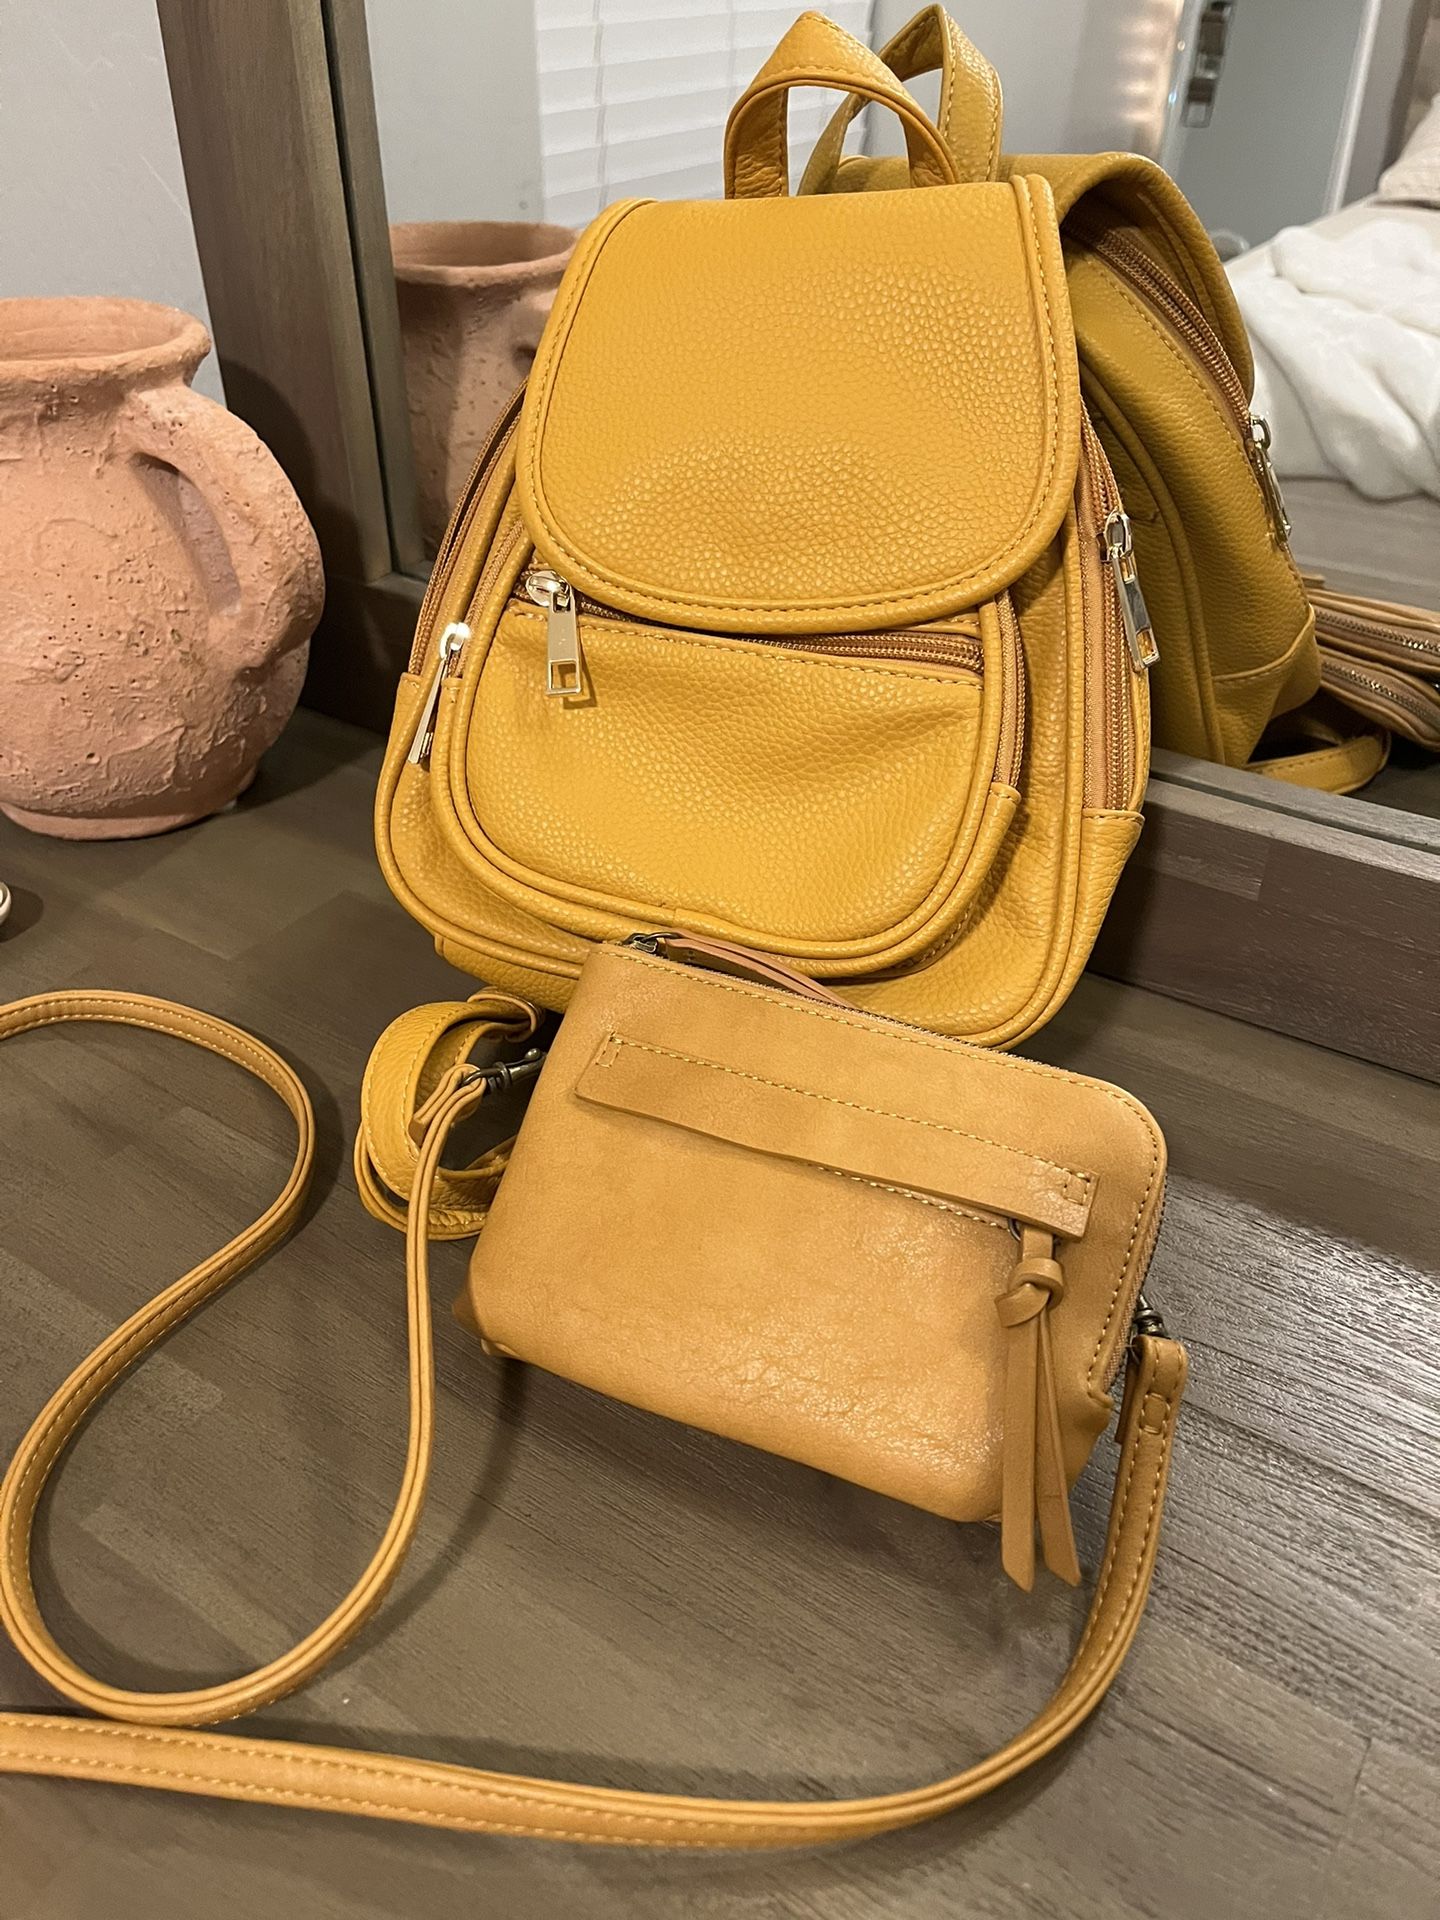 PURSE AND MINI BACKPACK YELLOW SET